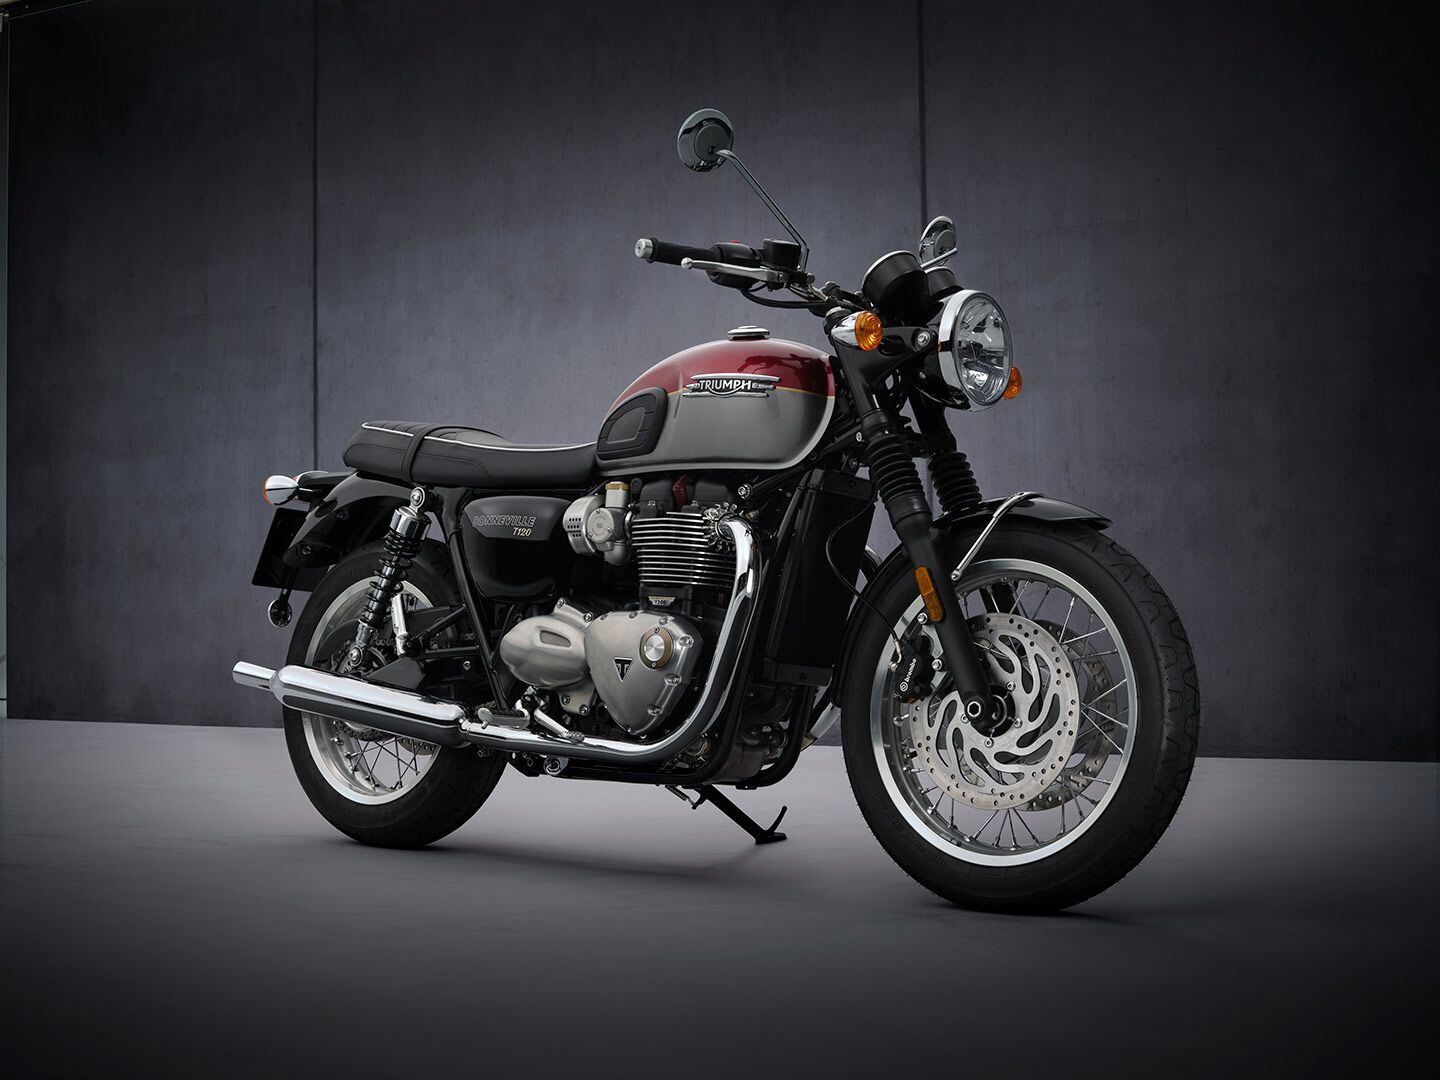 Born the same year as Barbie, the Triumph Bonneville is a great choice for a leisurely two-up ride.